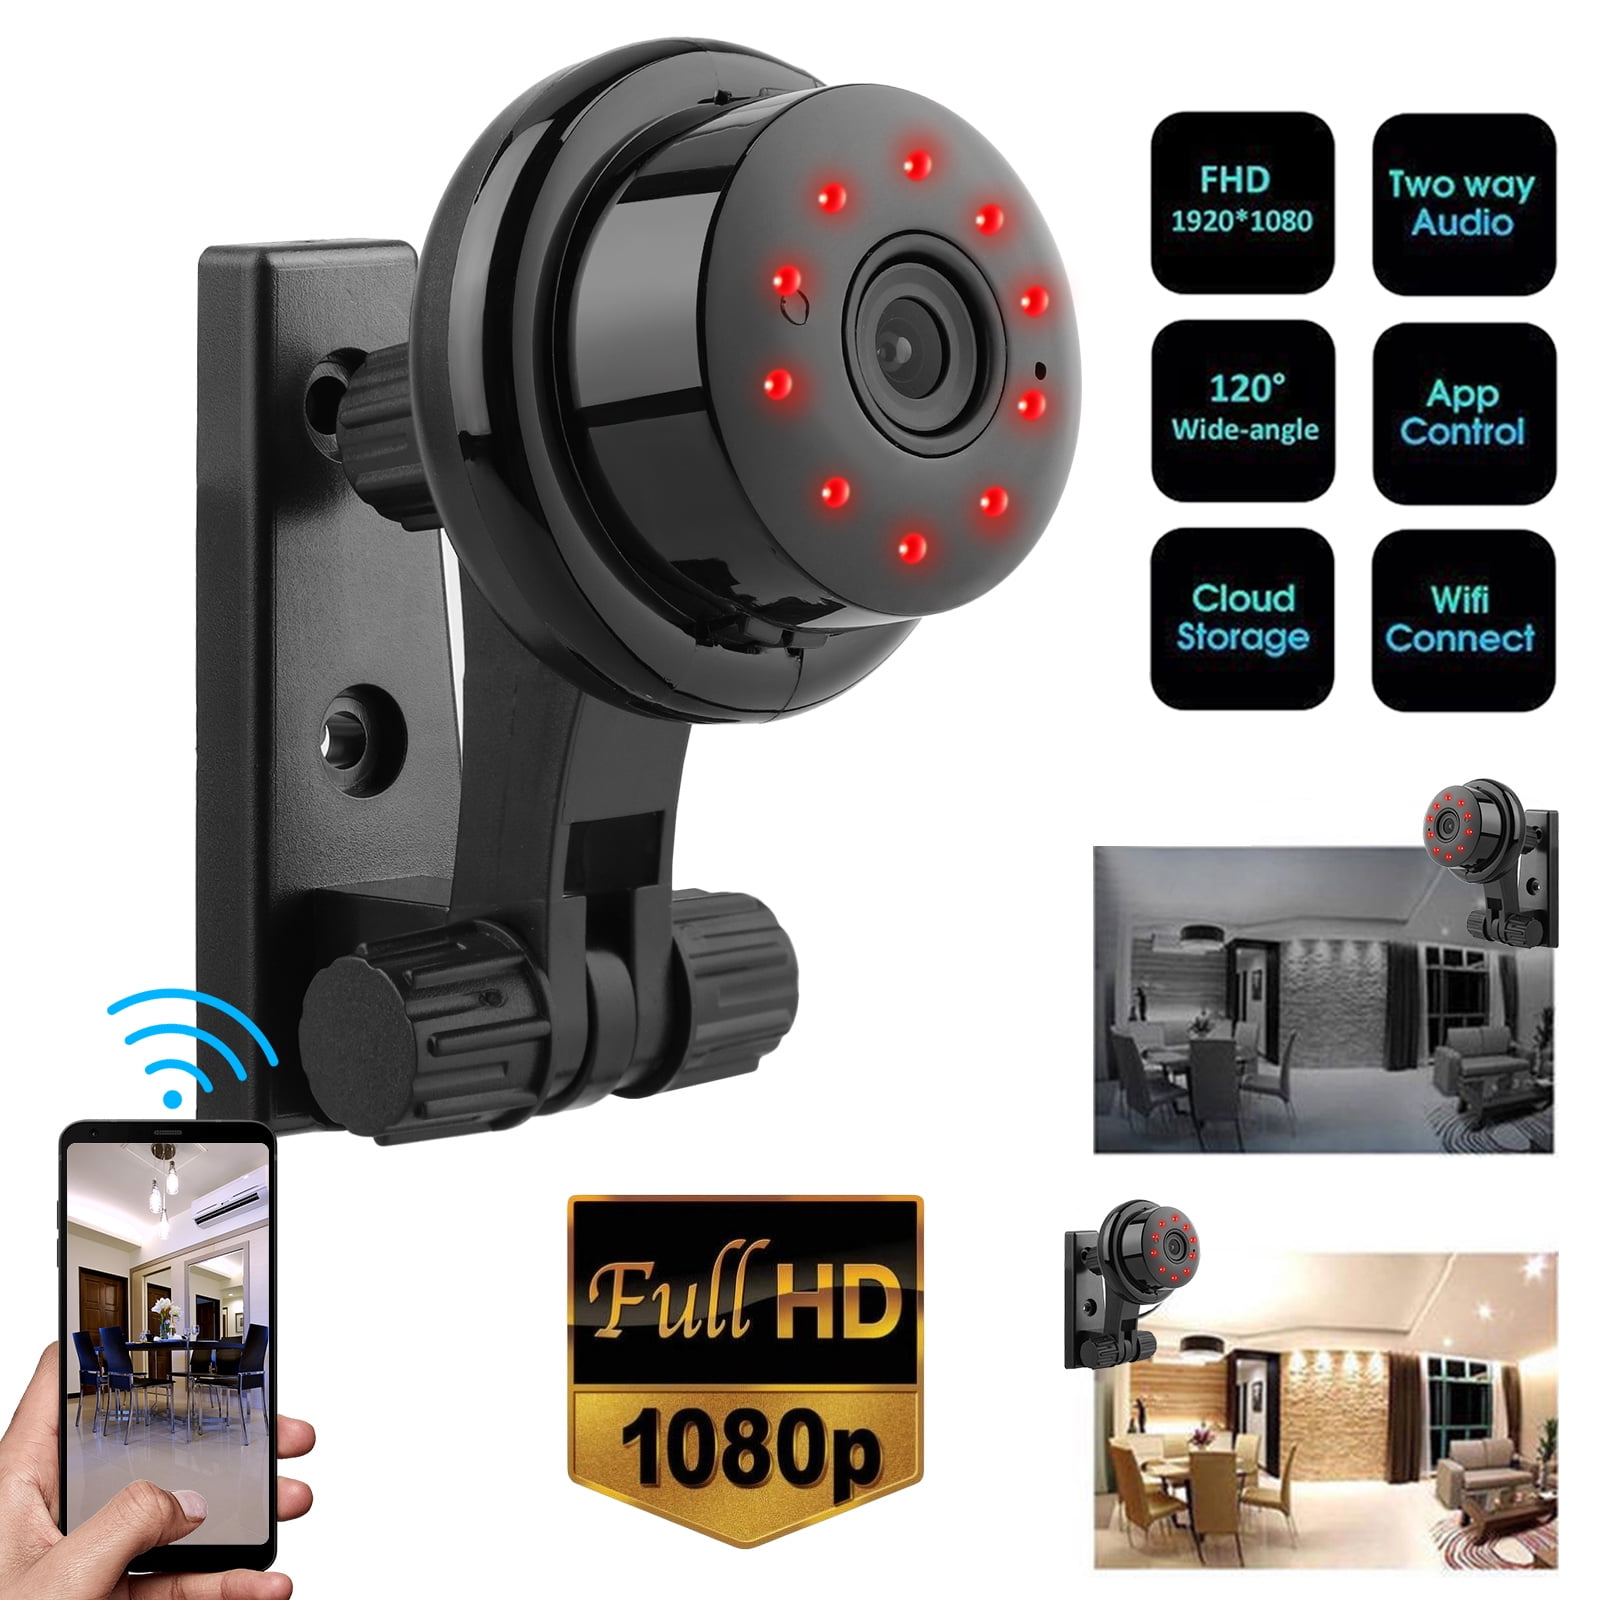 small wifi outdoor security camera